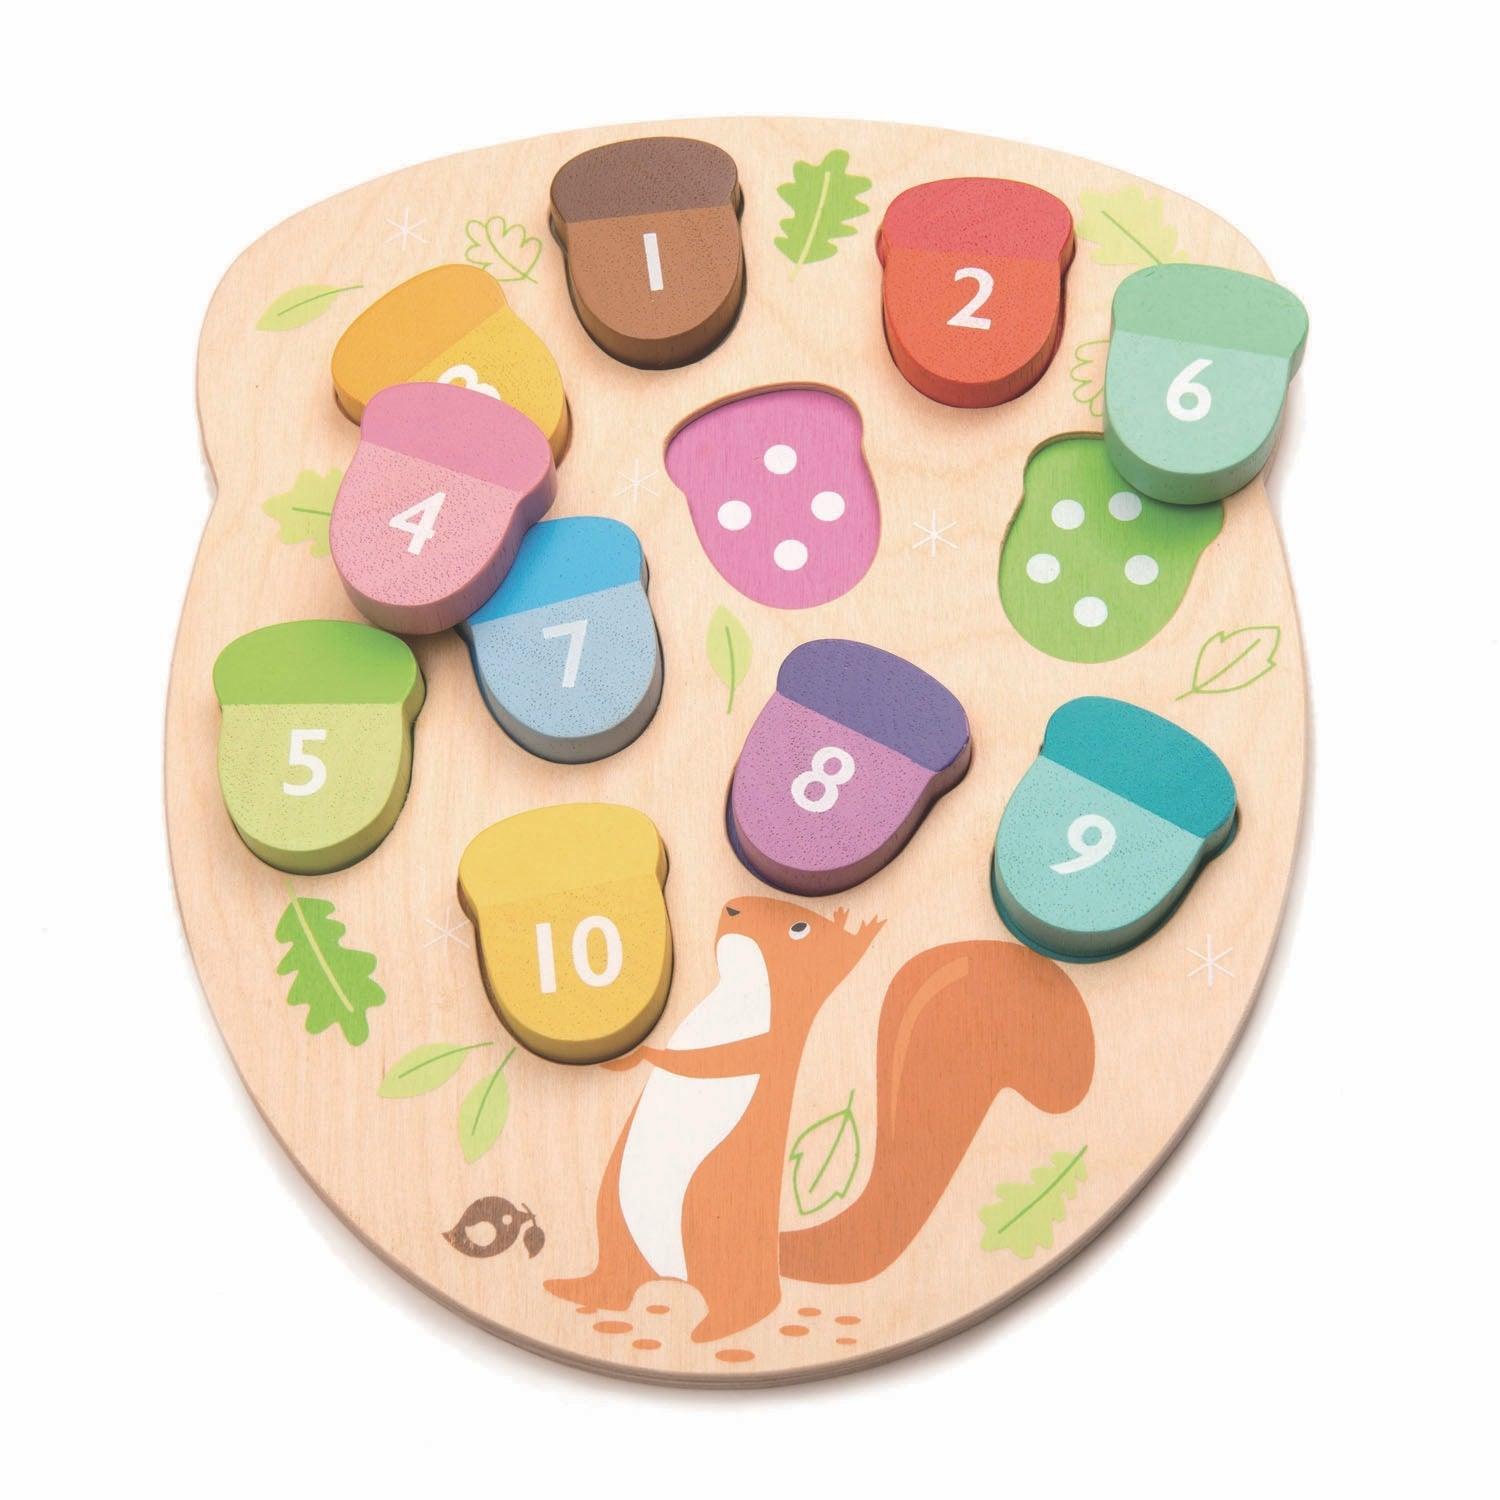 Tender Leaf Toys: counting puzzle How Many Acorns?